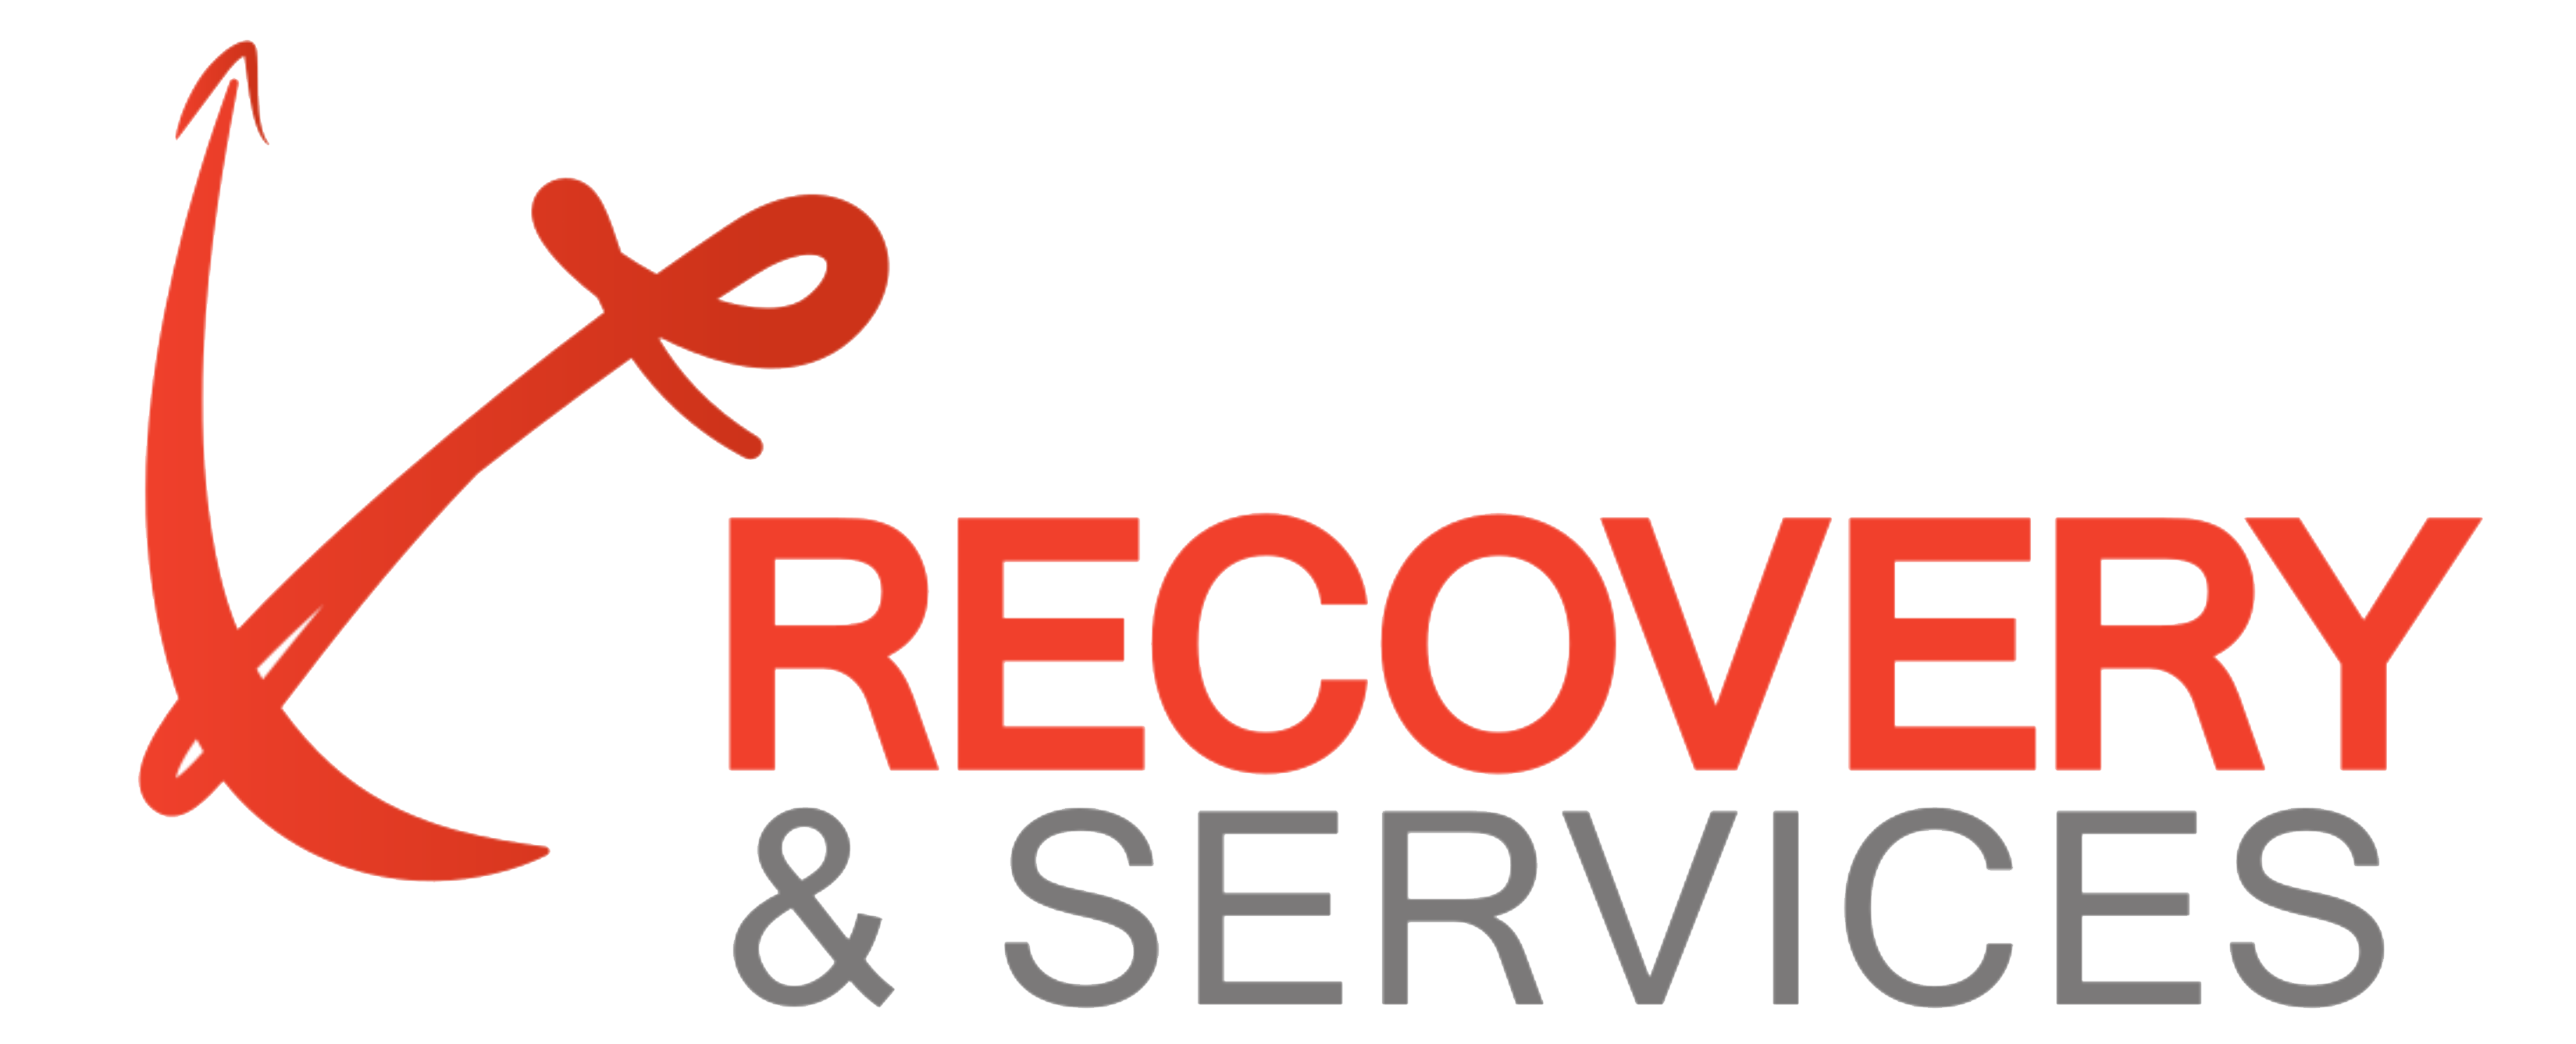 Recovery & Services